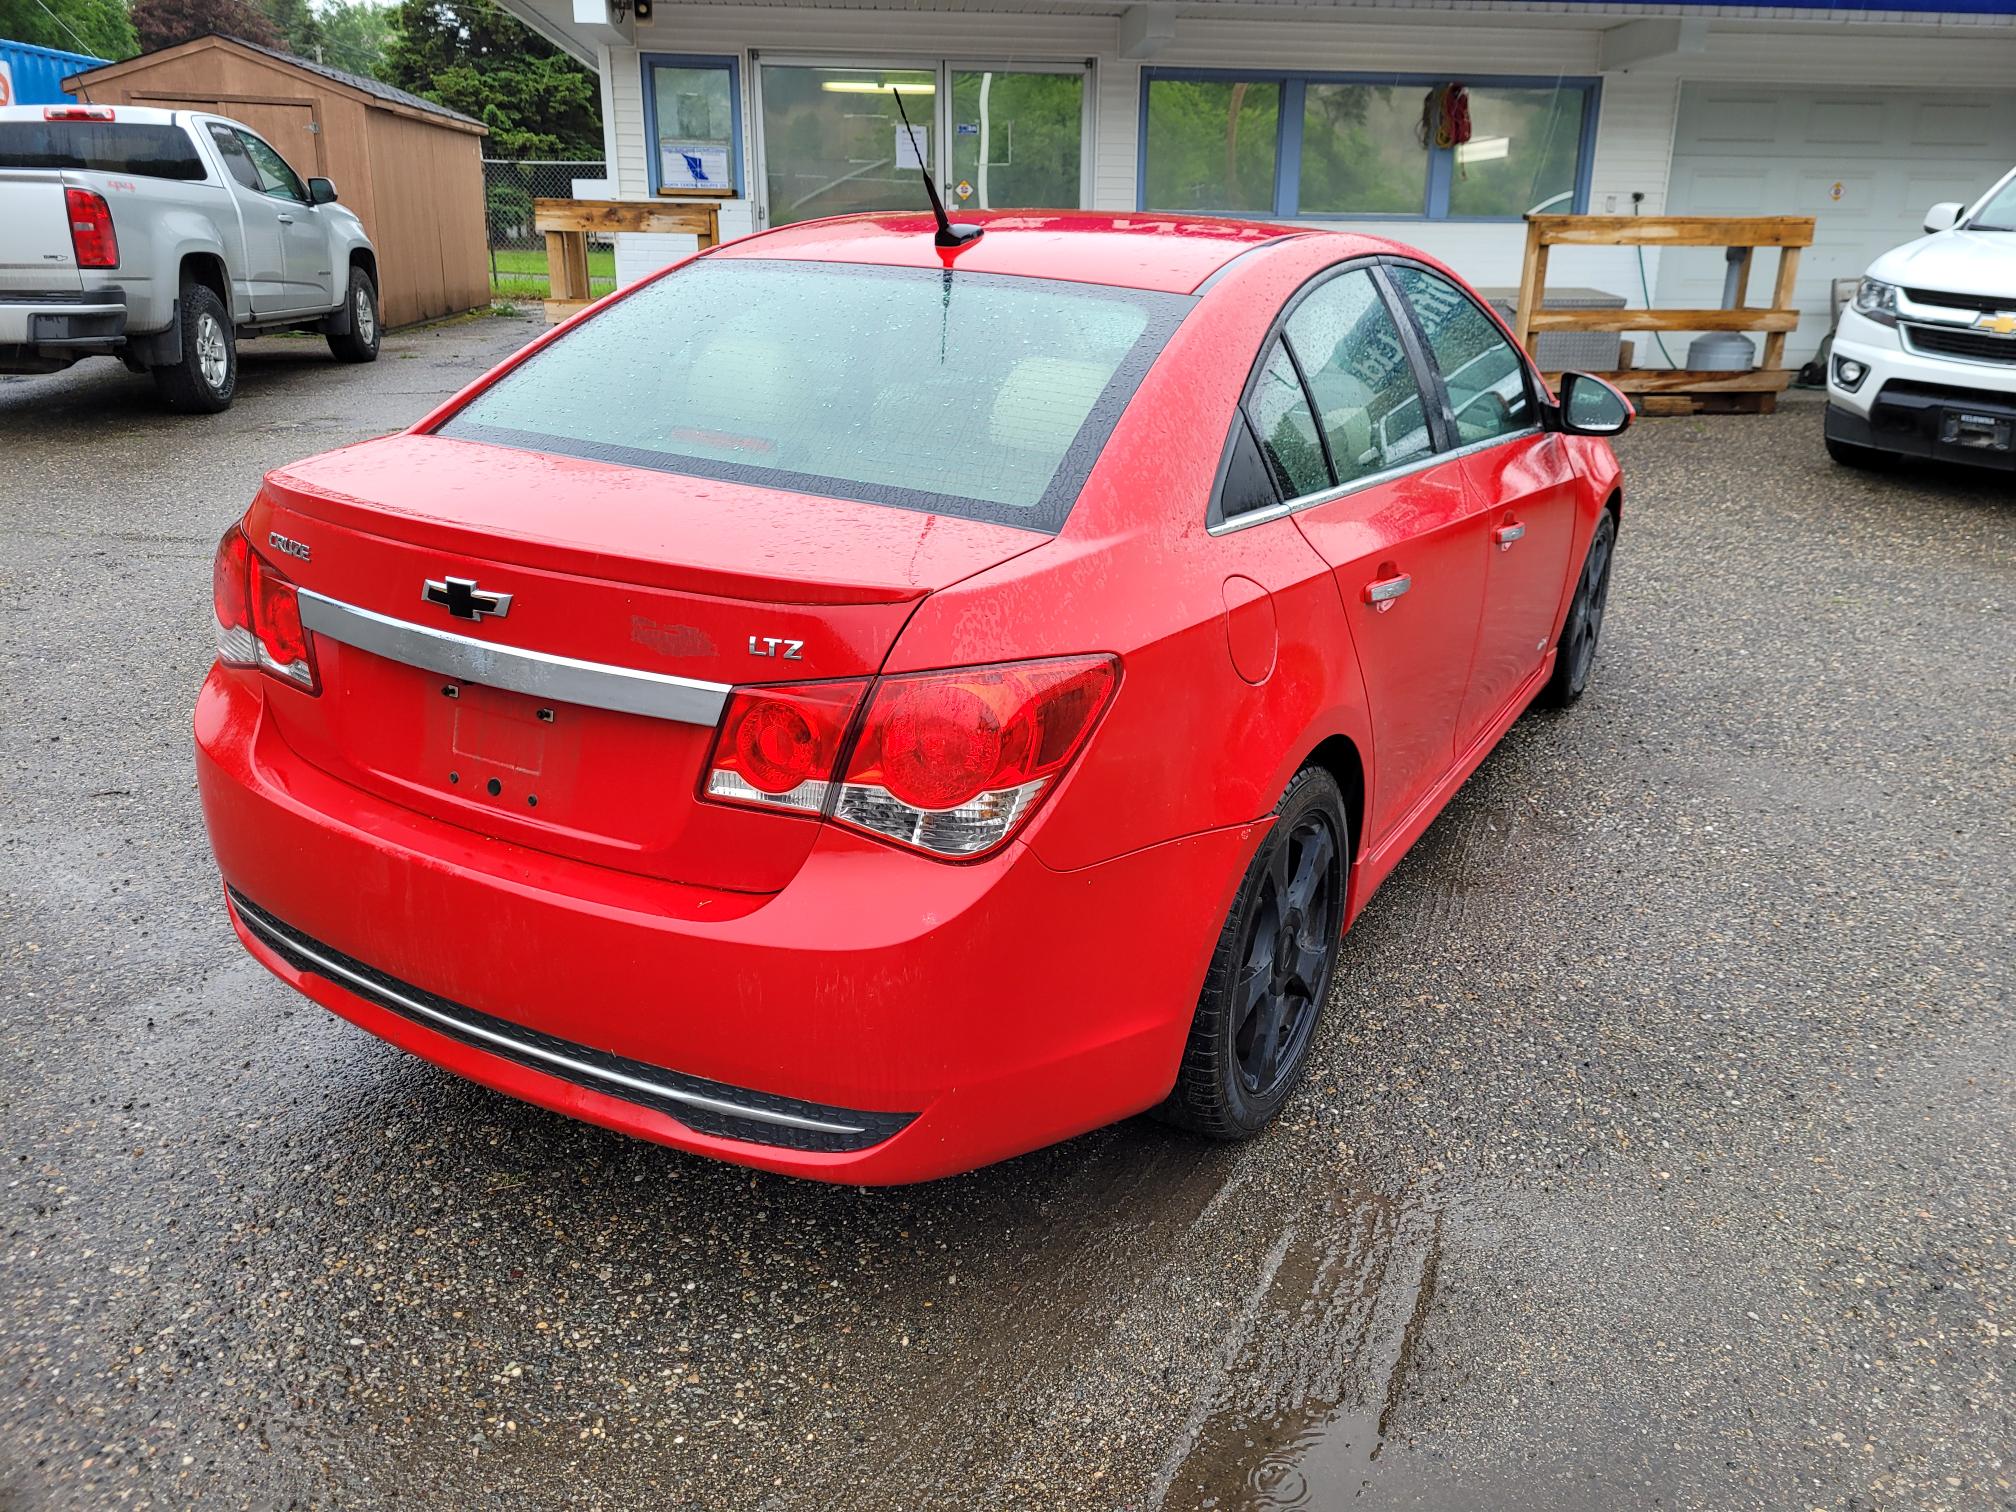 2013 Chevrolet Cruze LTZ RS #B-PG-0609 Located in Prince George